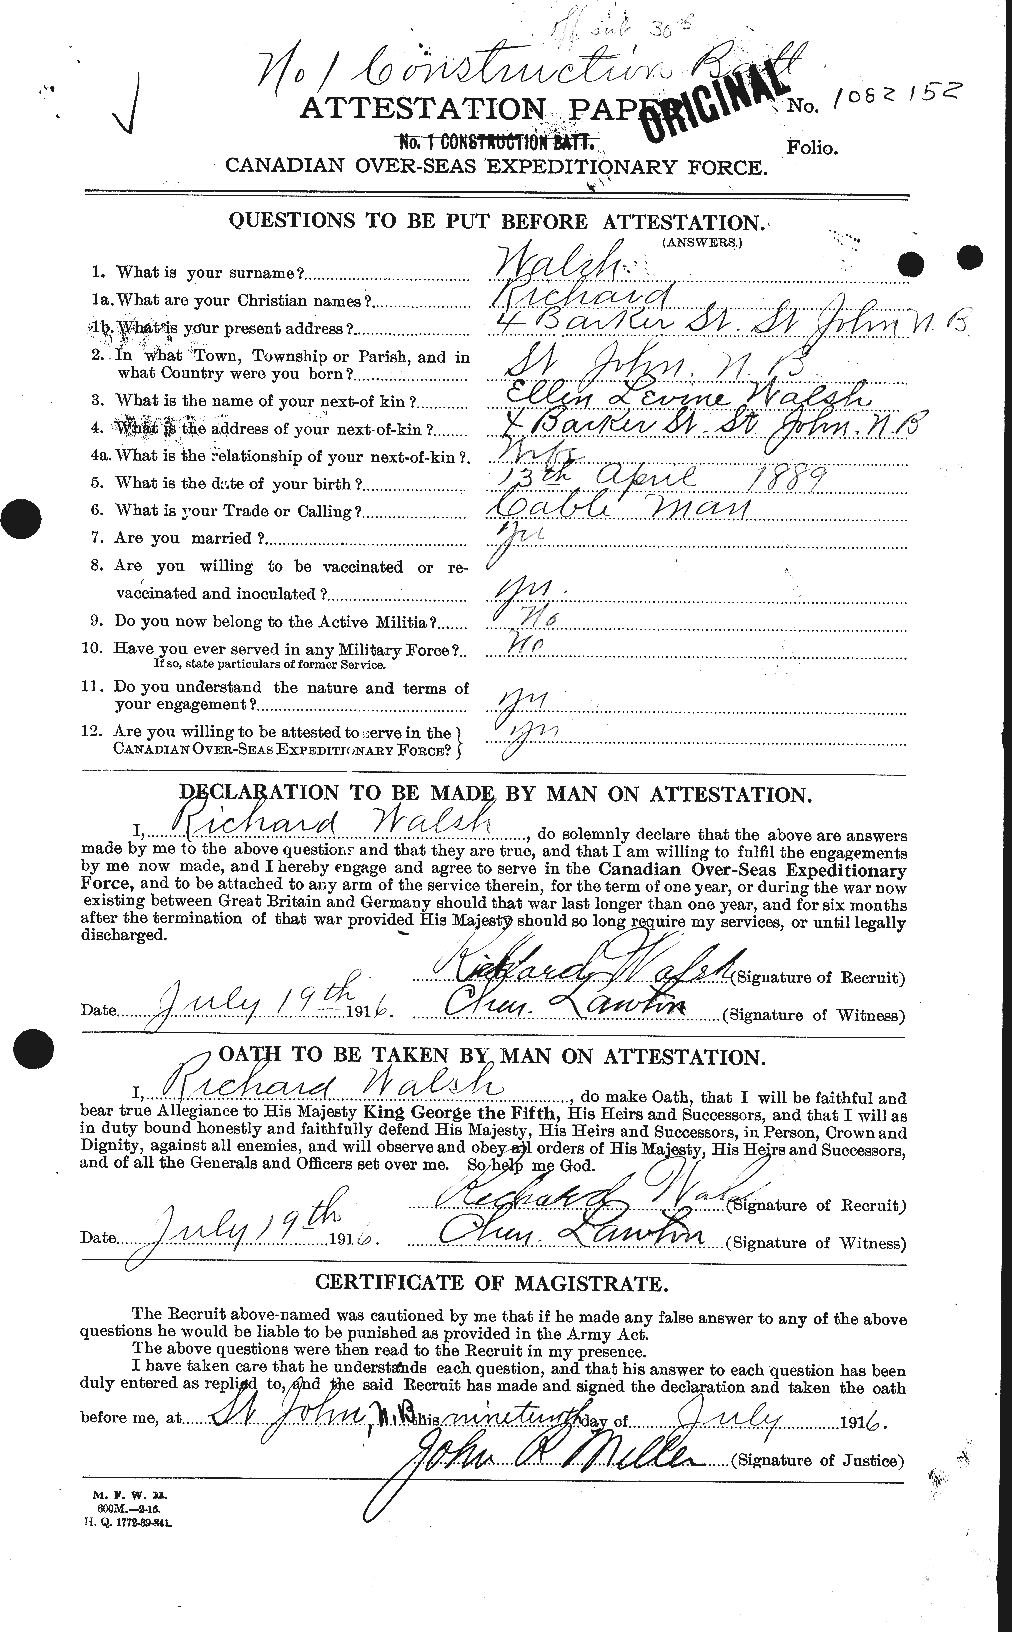 Personnel Records of the First World War - CEF 653487a